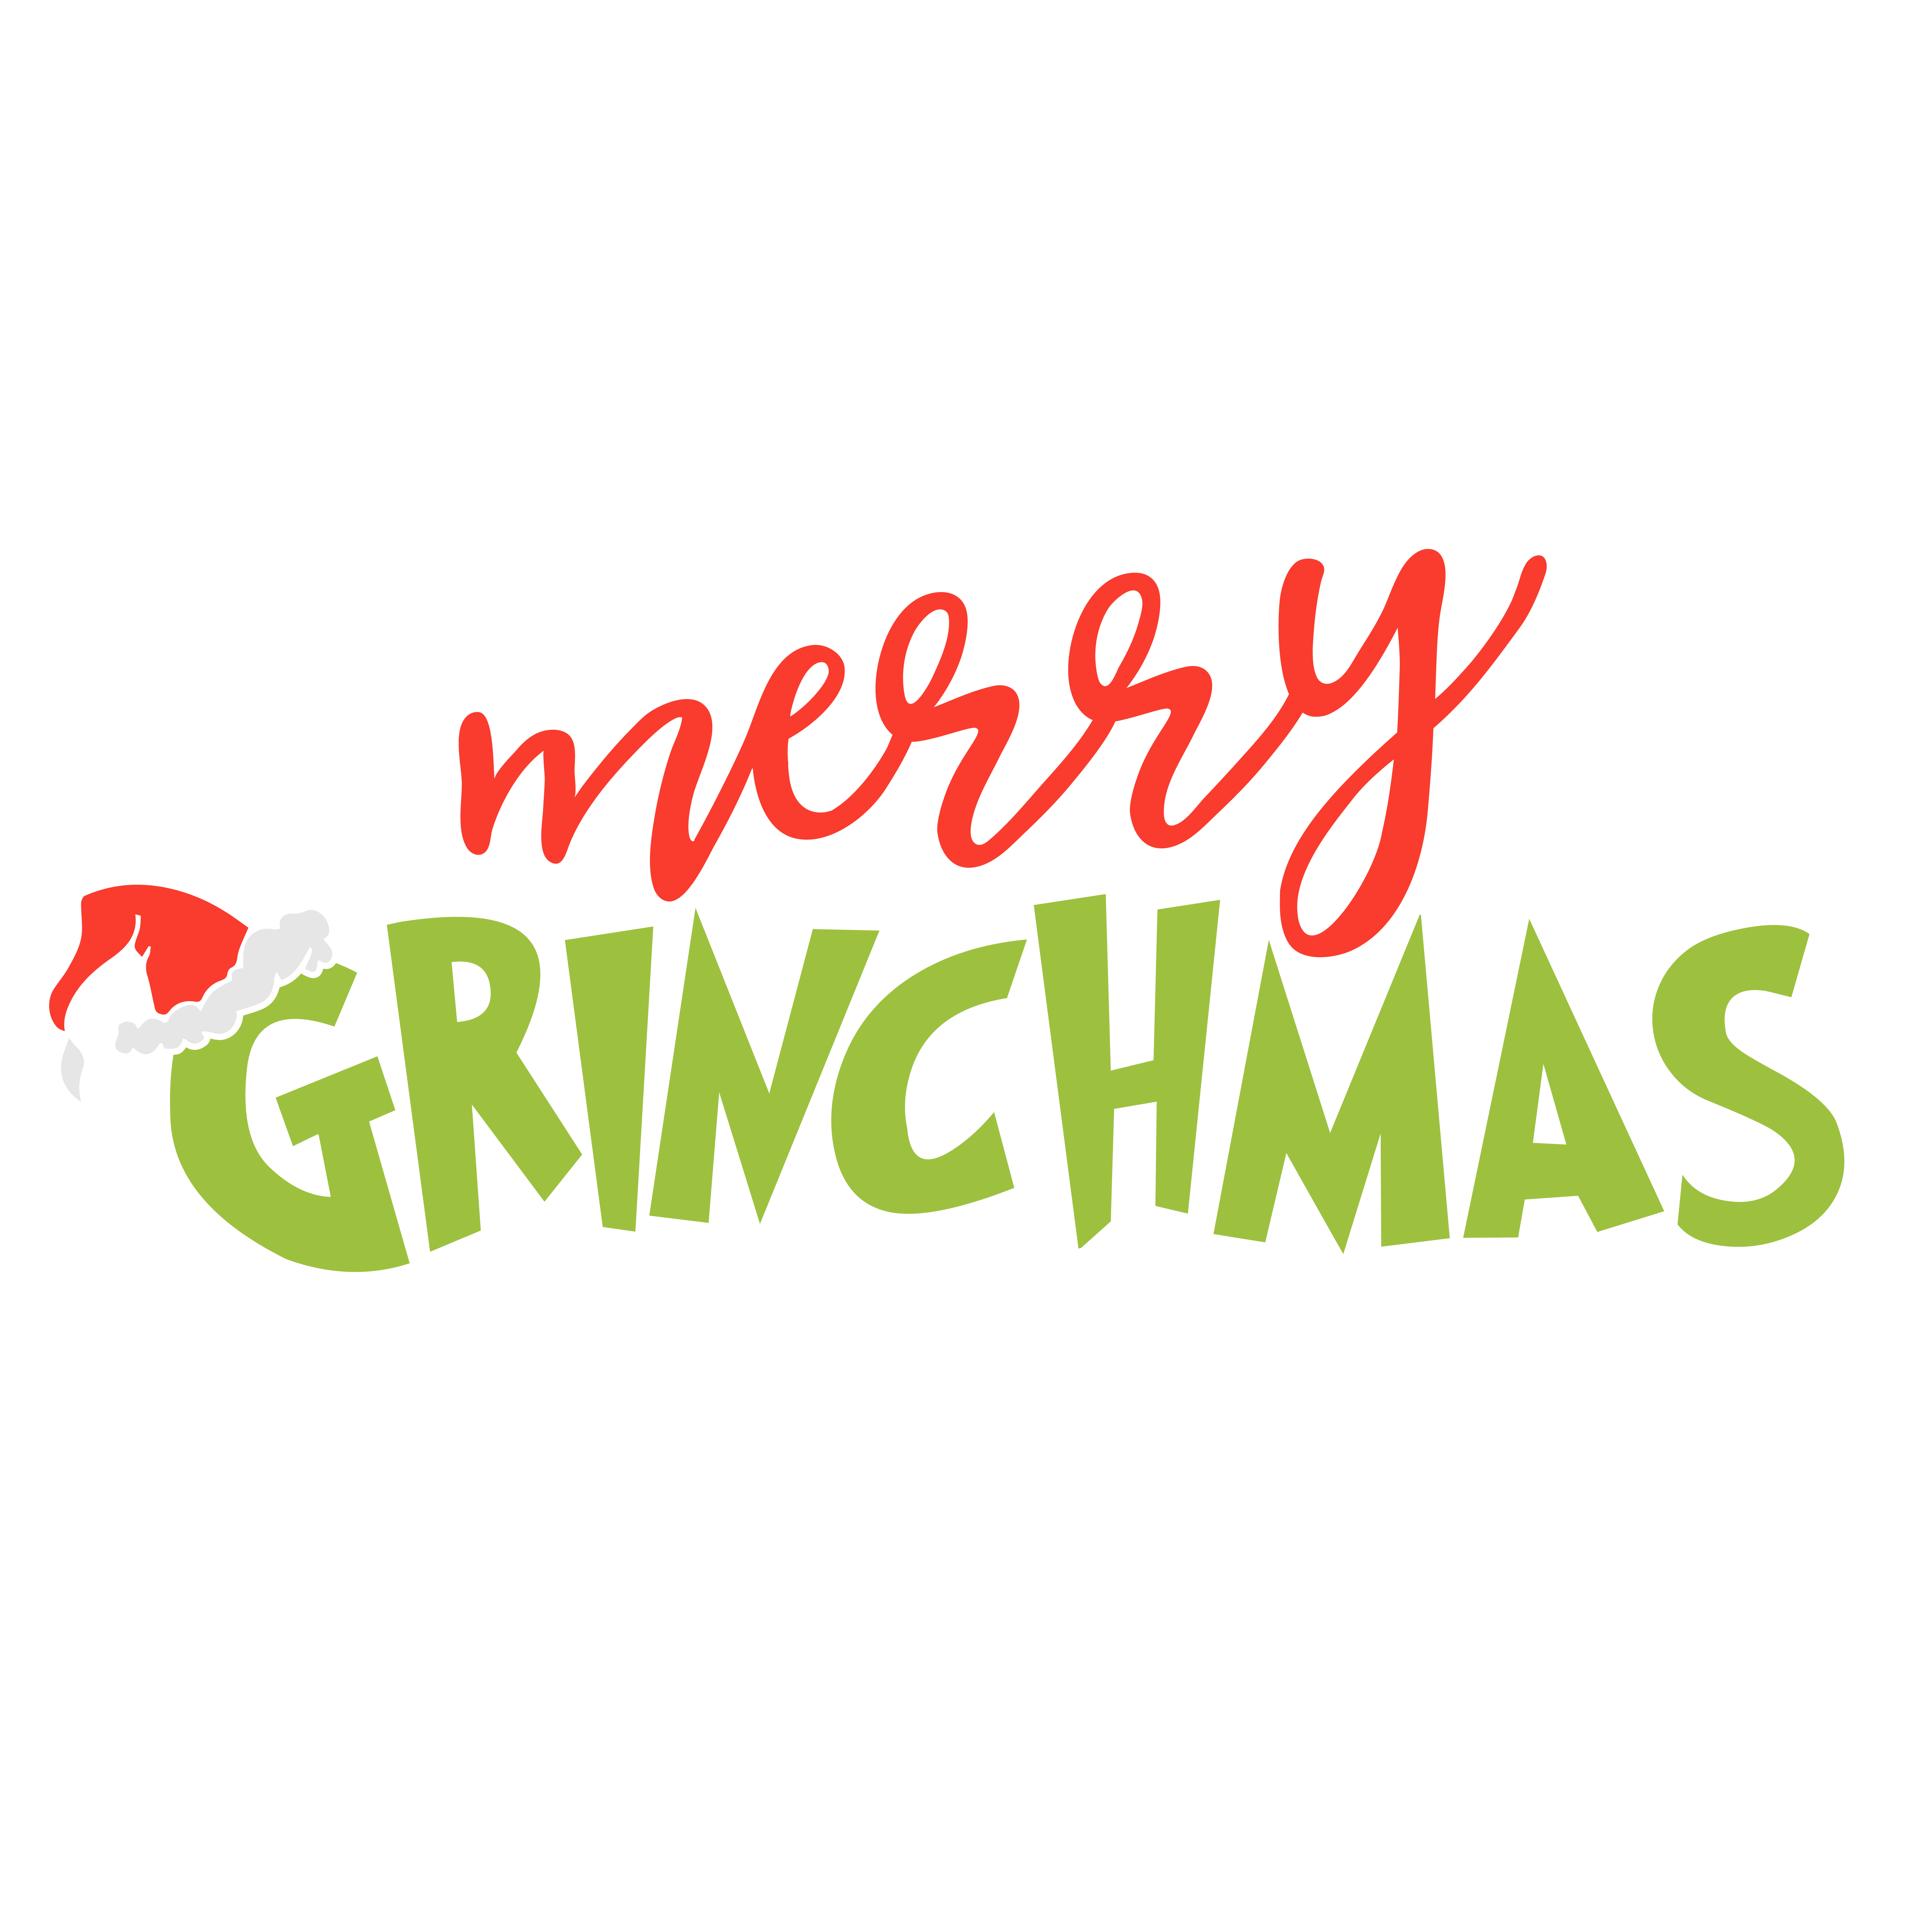 merry grinchmas Awesome with Sprinkles